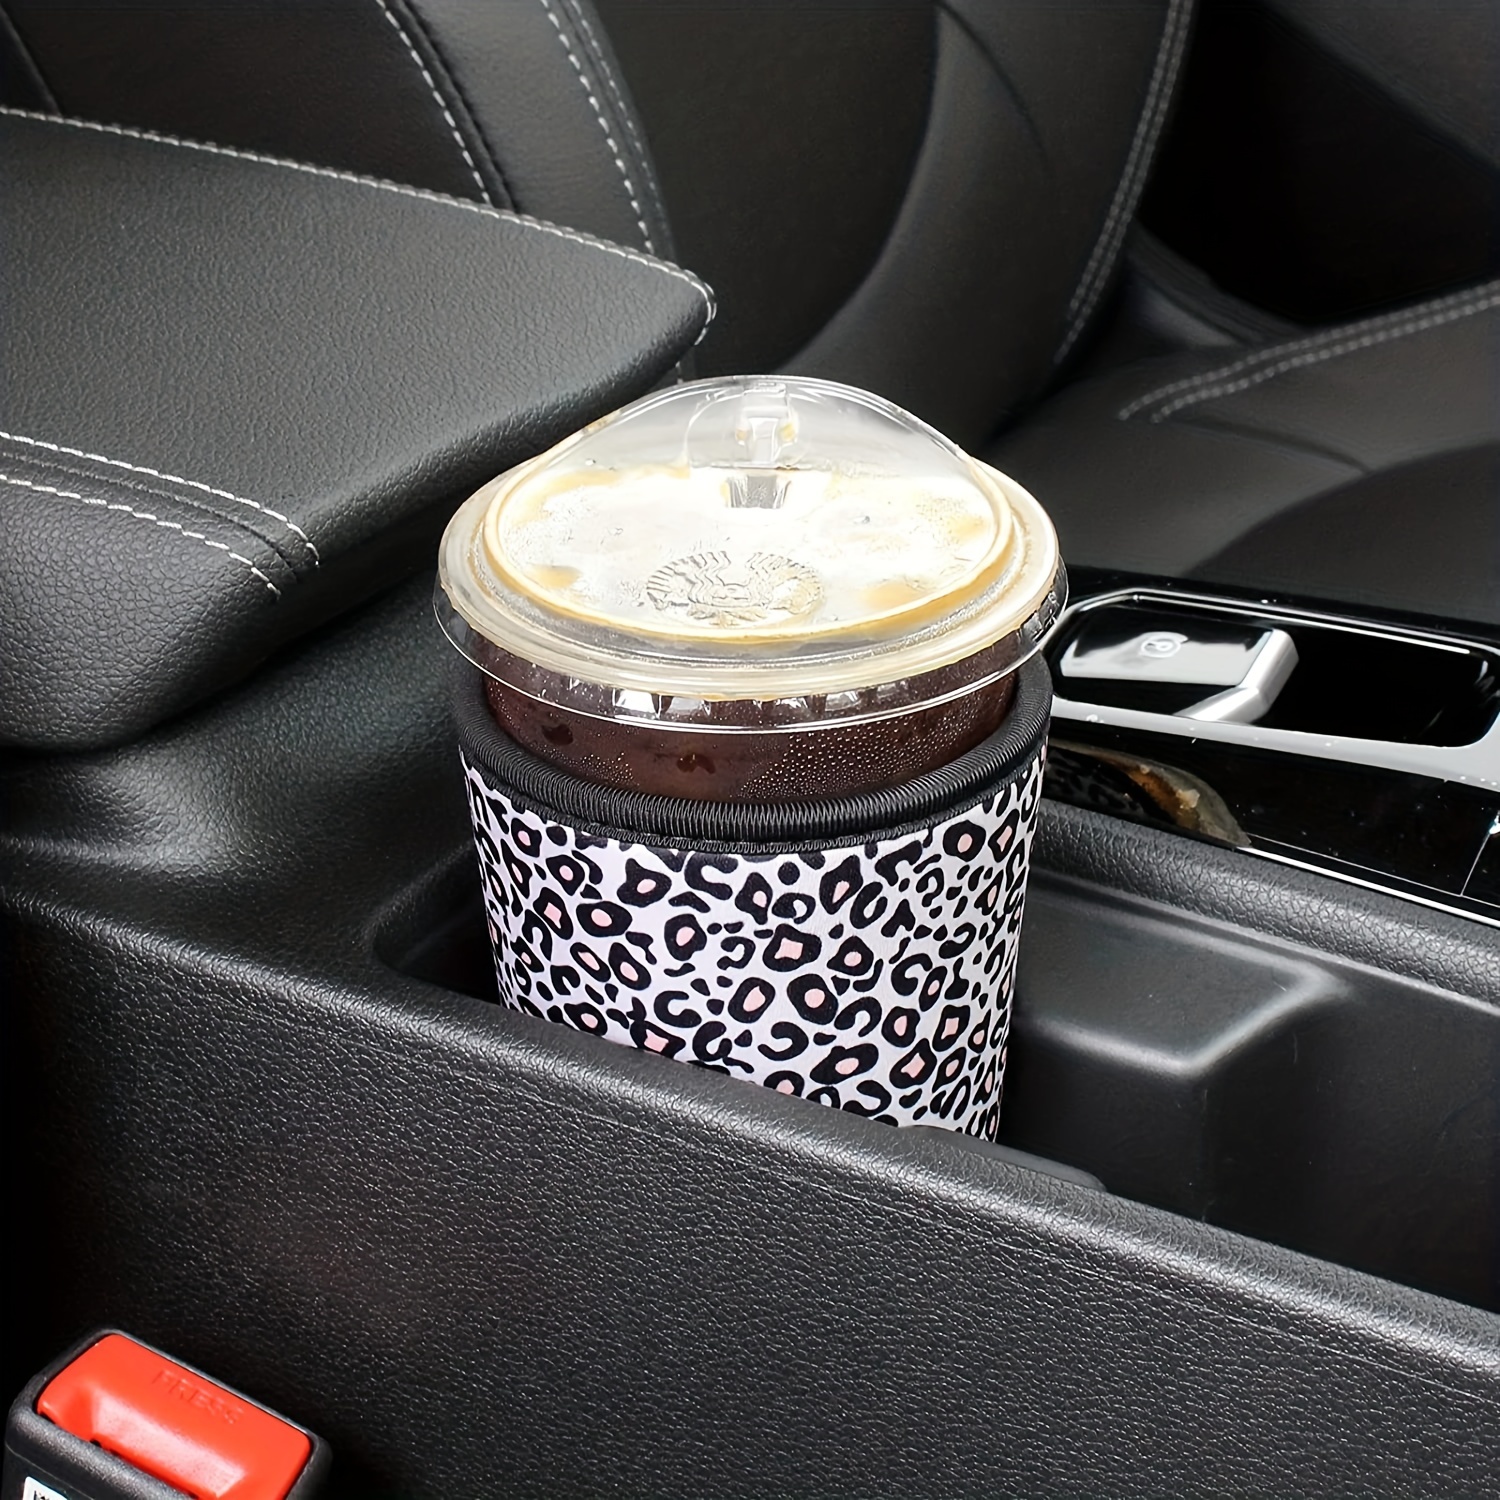 3 Pack Reusable Iced Coffee Sleeve, Insulator Cup Sleeve for Cold Drinks  Beverages, Neoprene Cup Holder